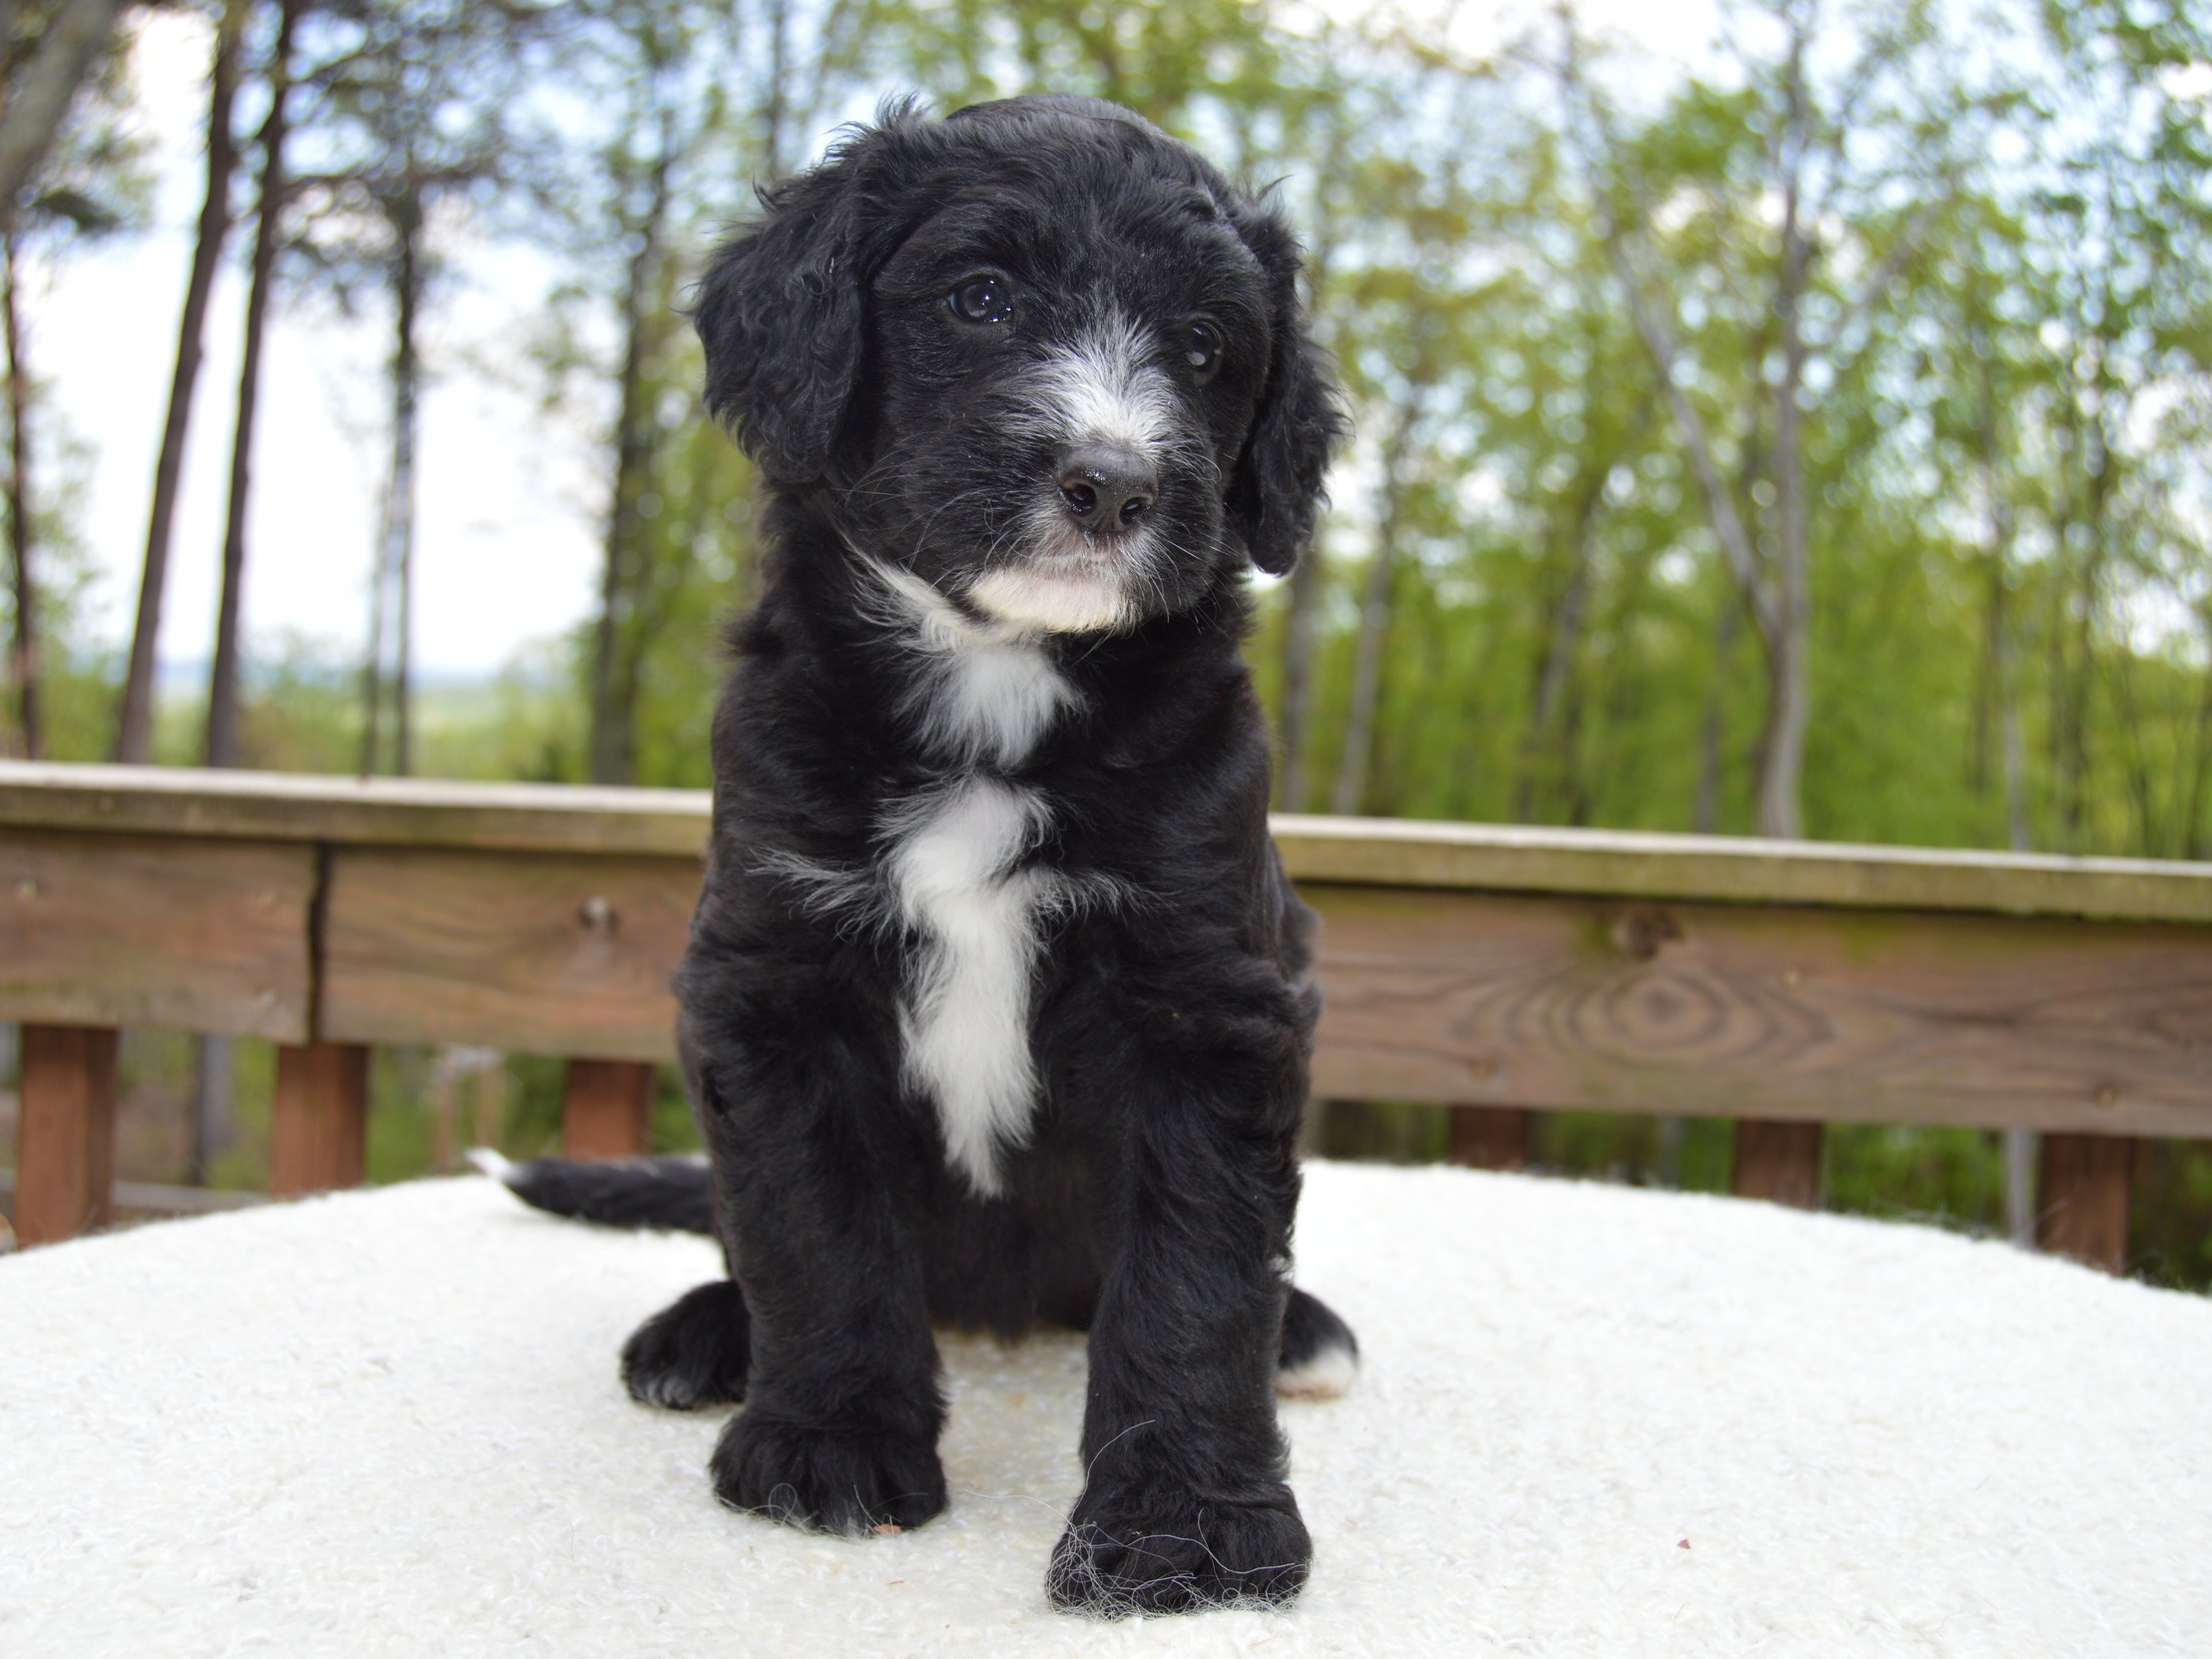 Sheepadoodle - Mini Puppies For Sale - Puppy Adoption - Keystone Puppies